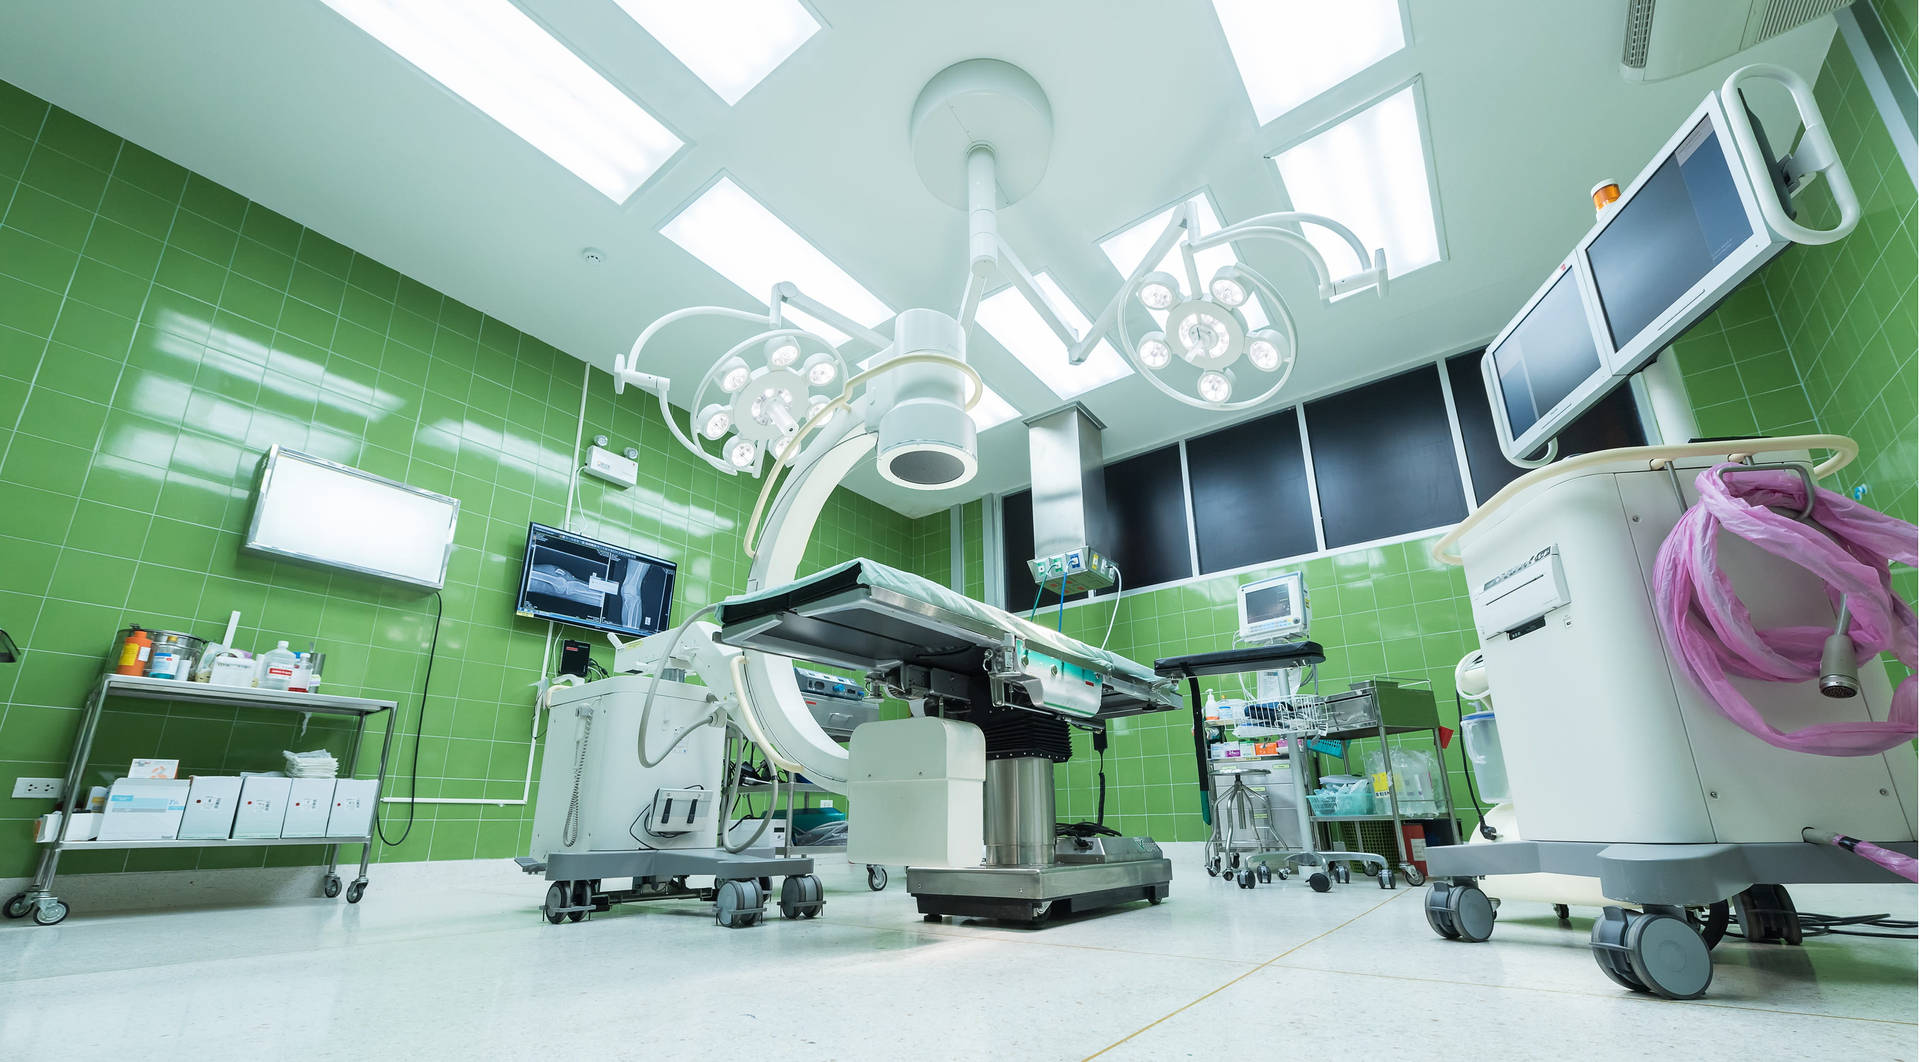 Skilled Entrepreneurs Operate in a Modern MBBS Operating Room Wallpaper